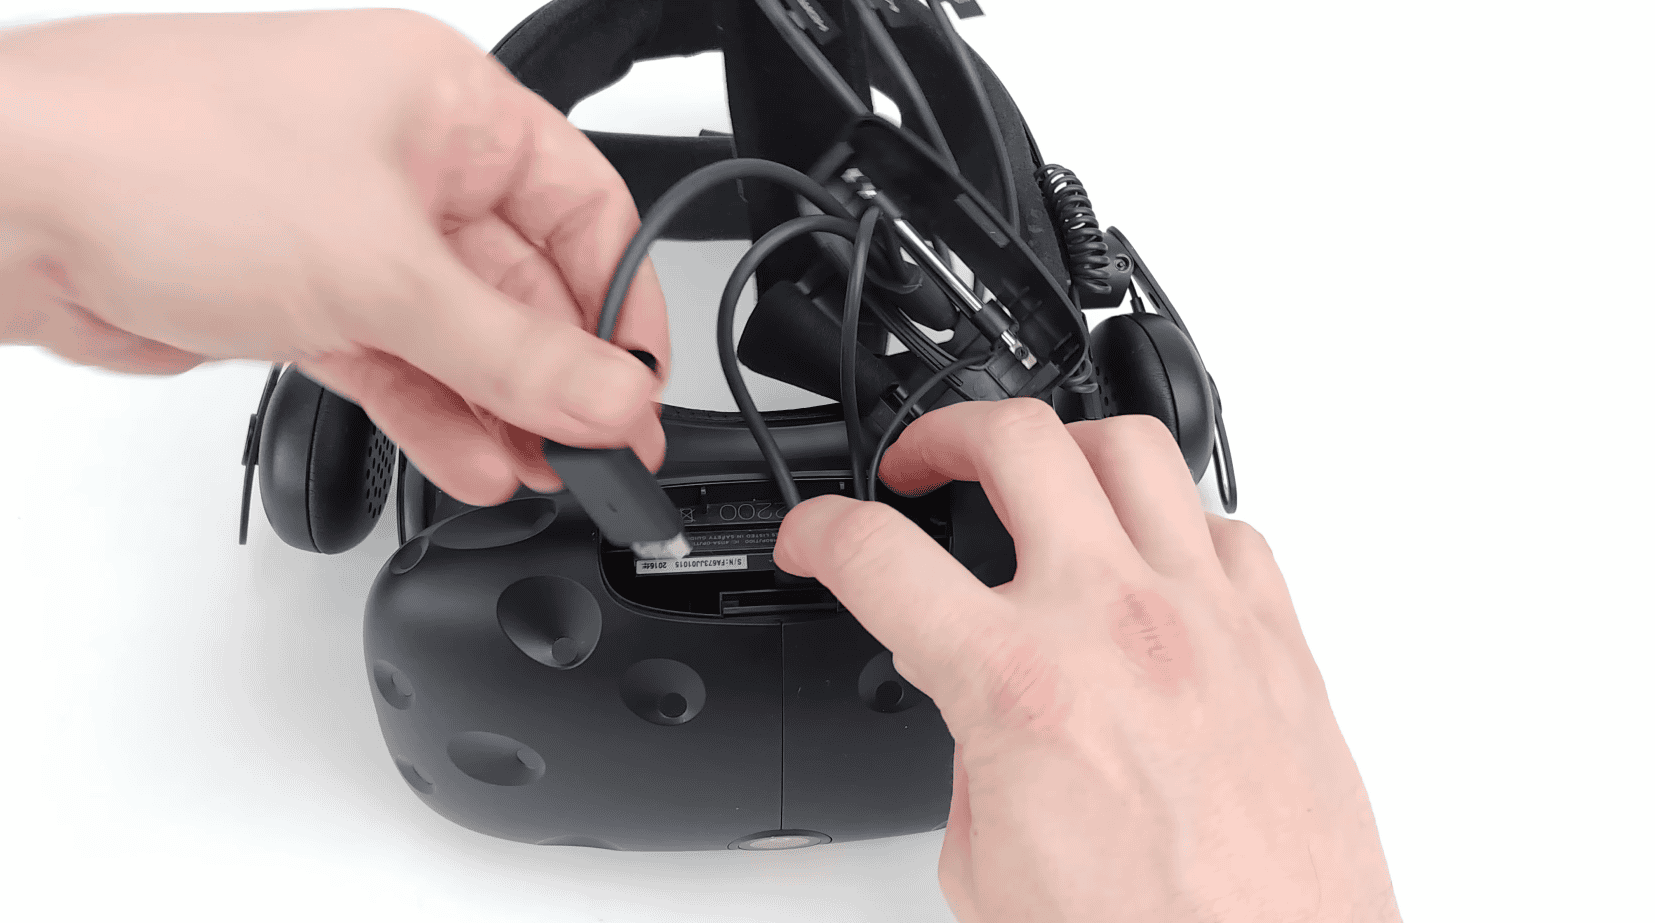 Installing cables in HTC Vive